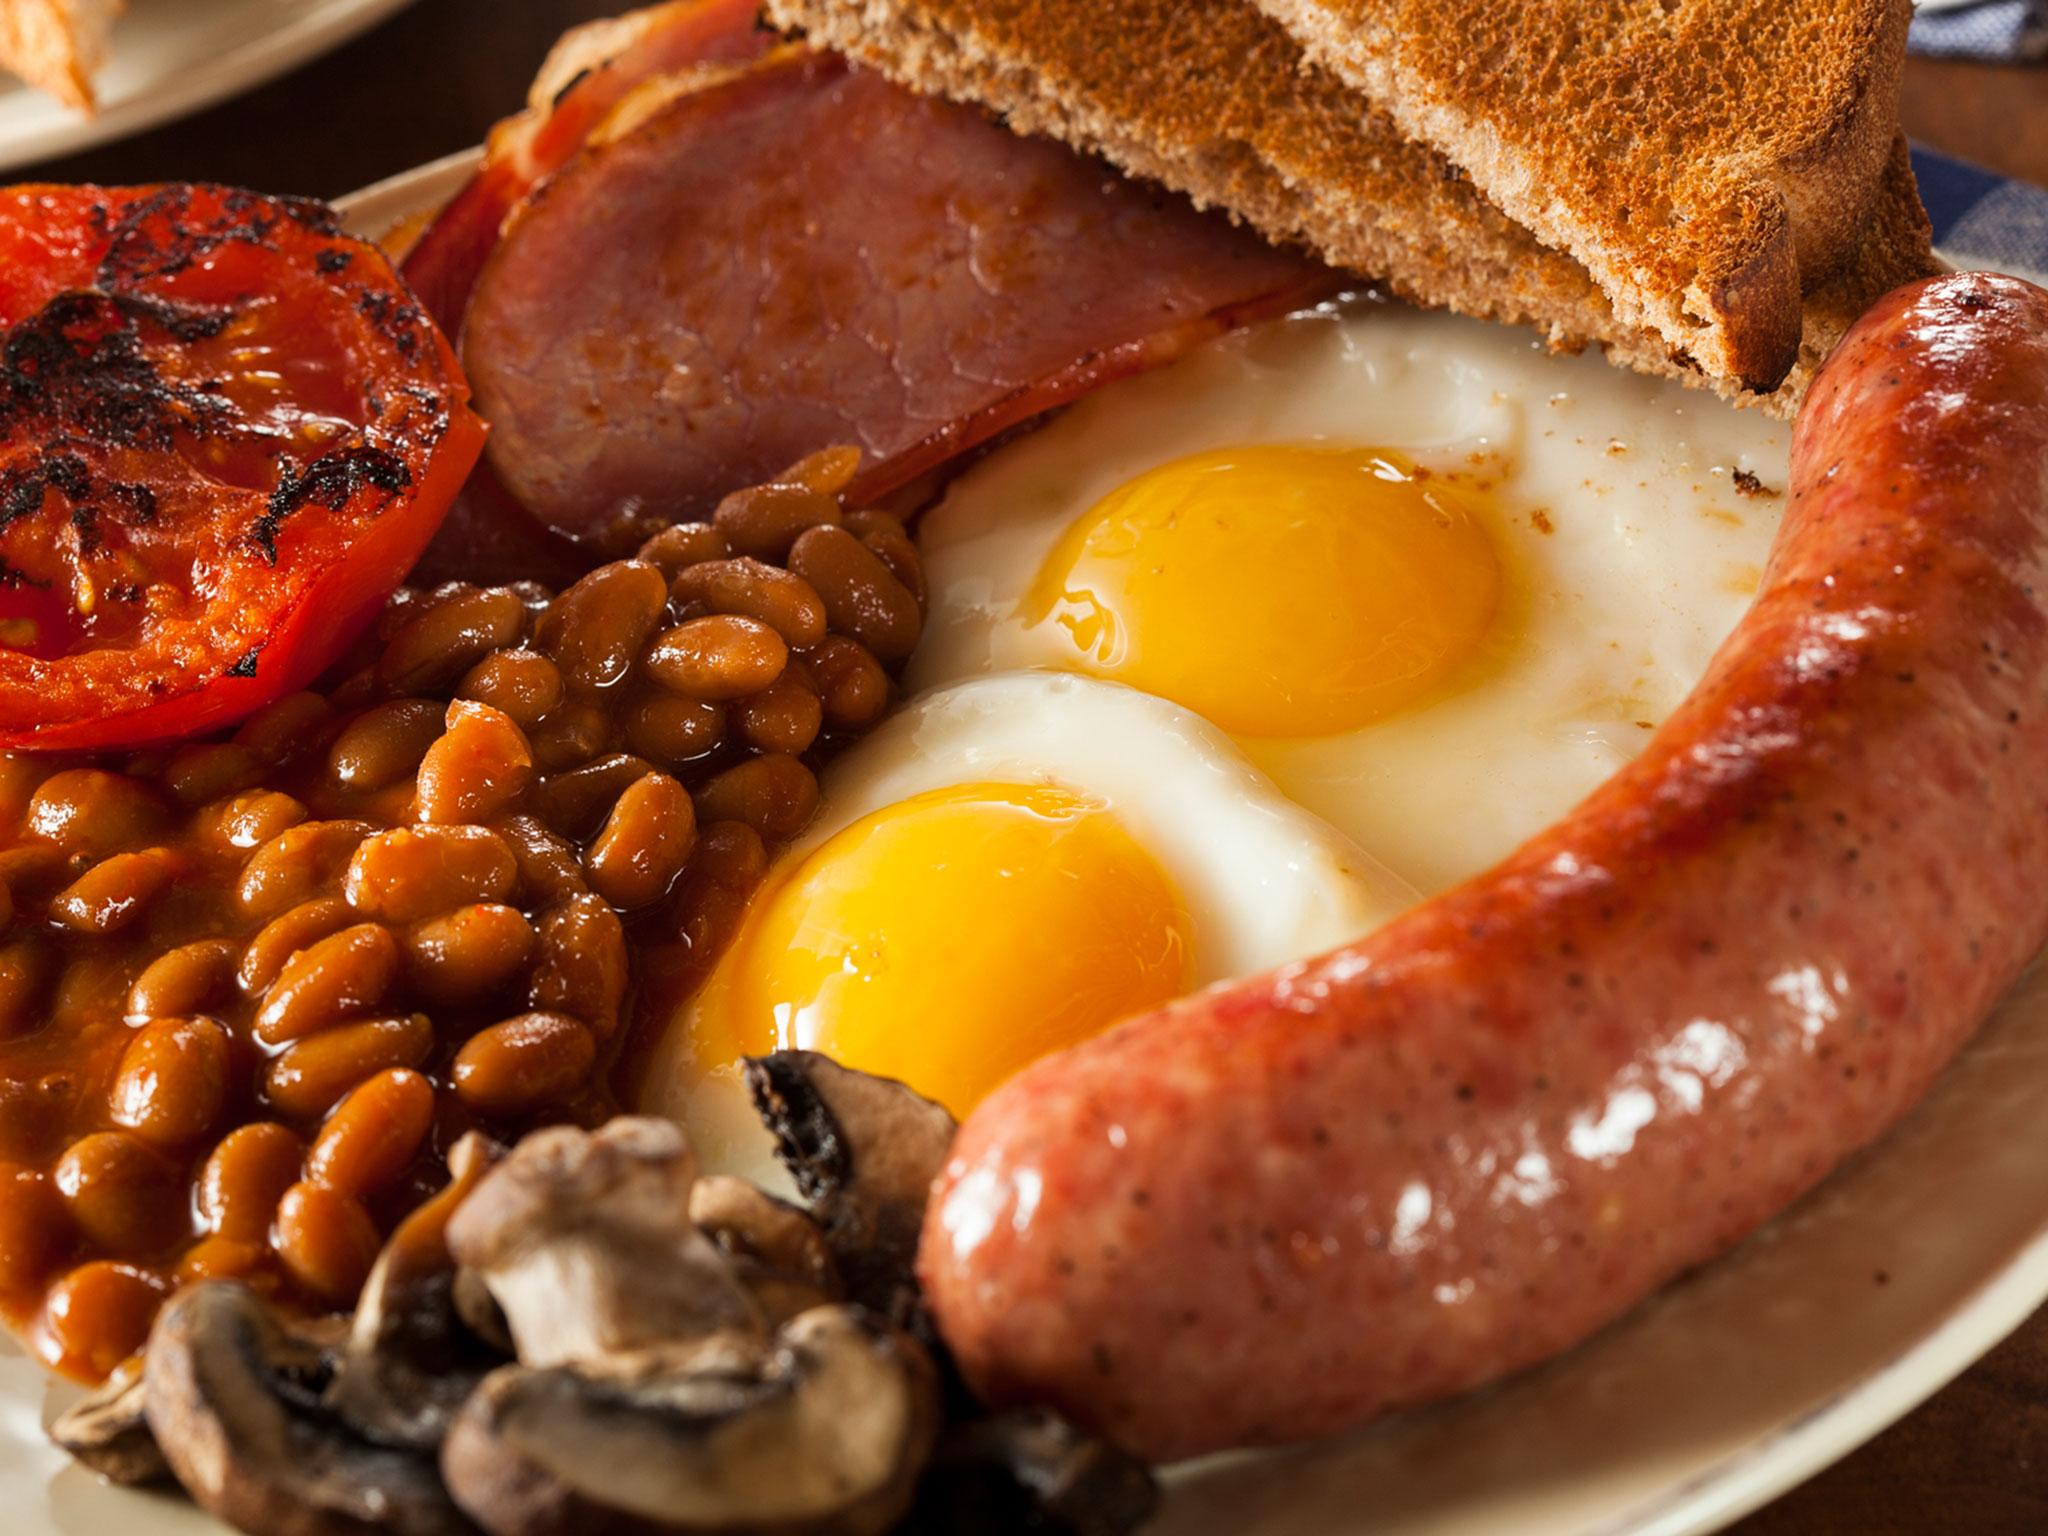 brekking-the-bank-cost-of-full-english-breakfasts-soars-up-to-25